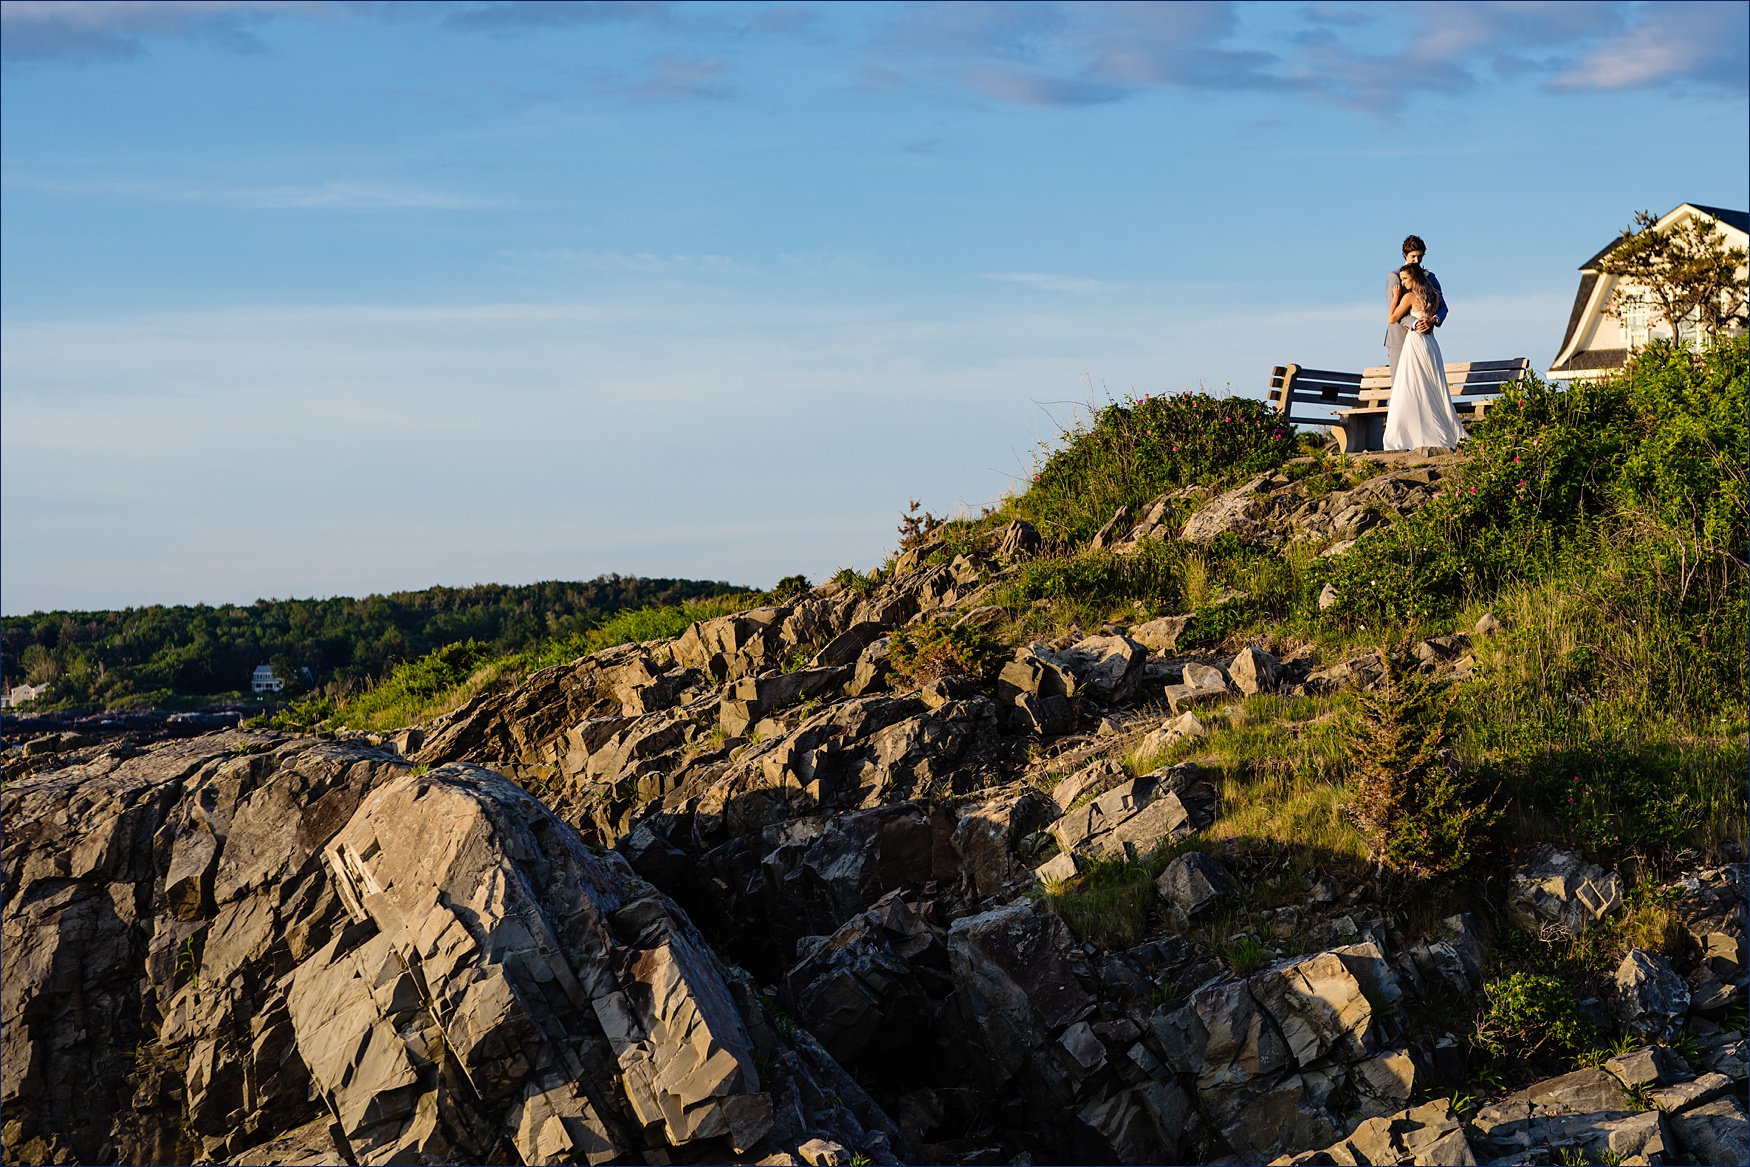 The newlyweds take in the Marginal Way view after eloping at sunrise